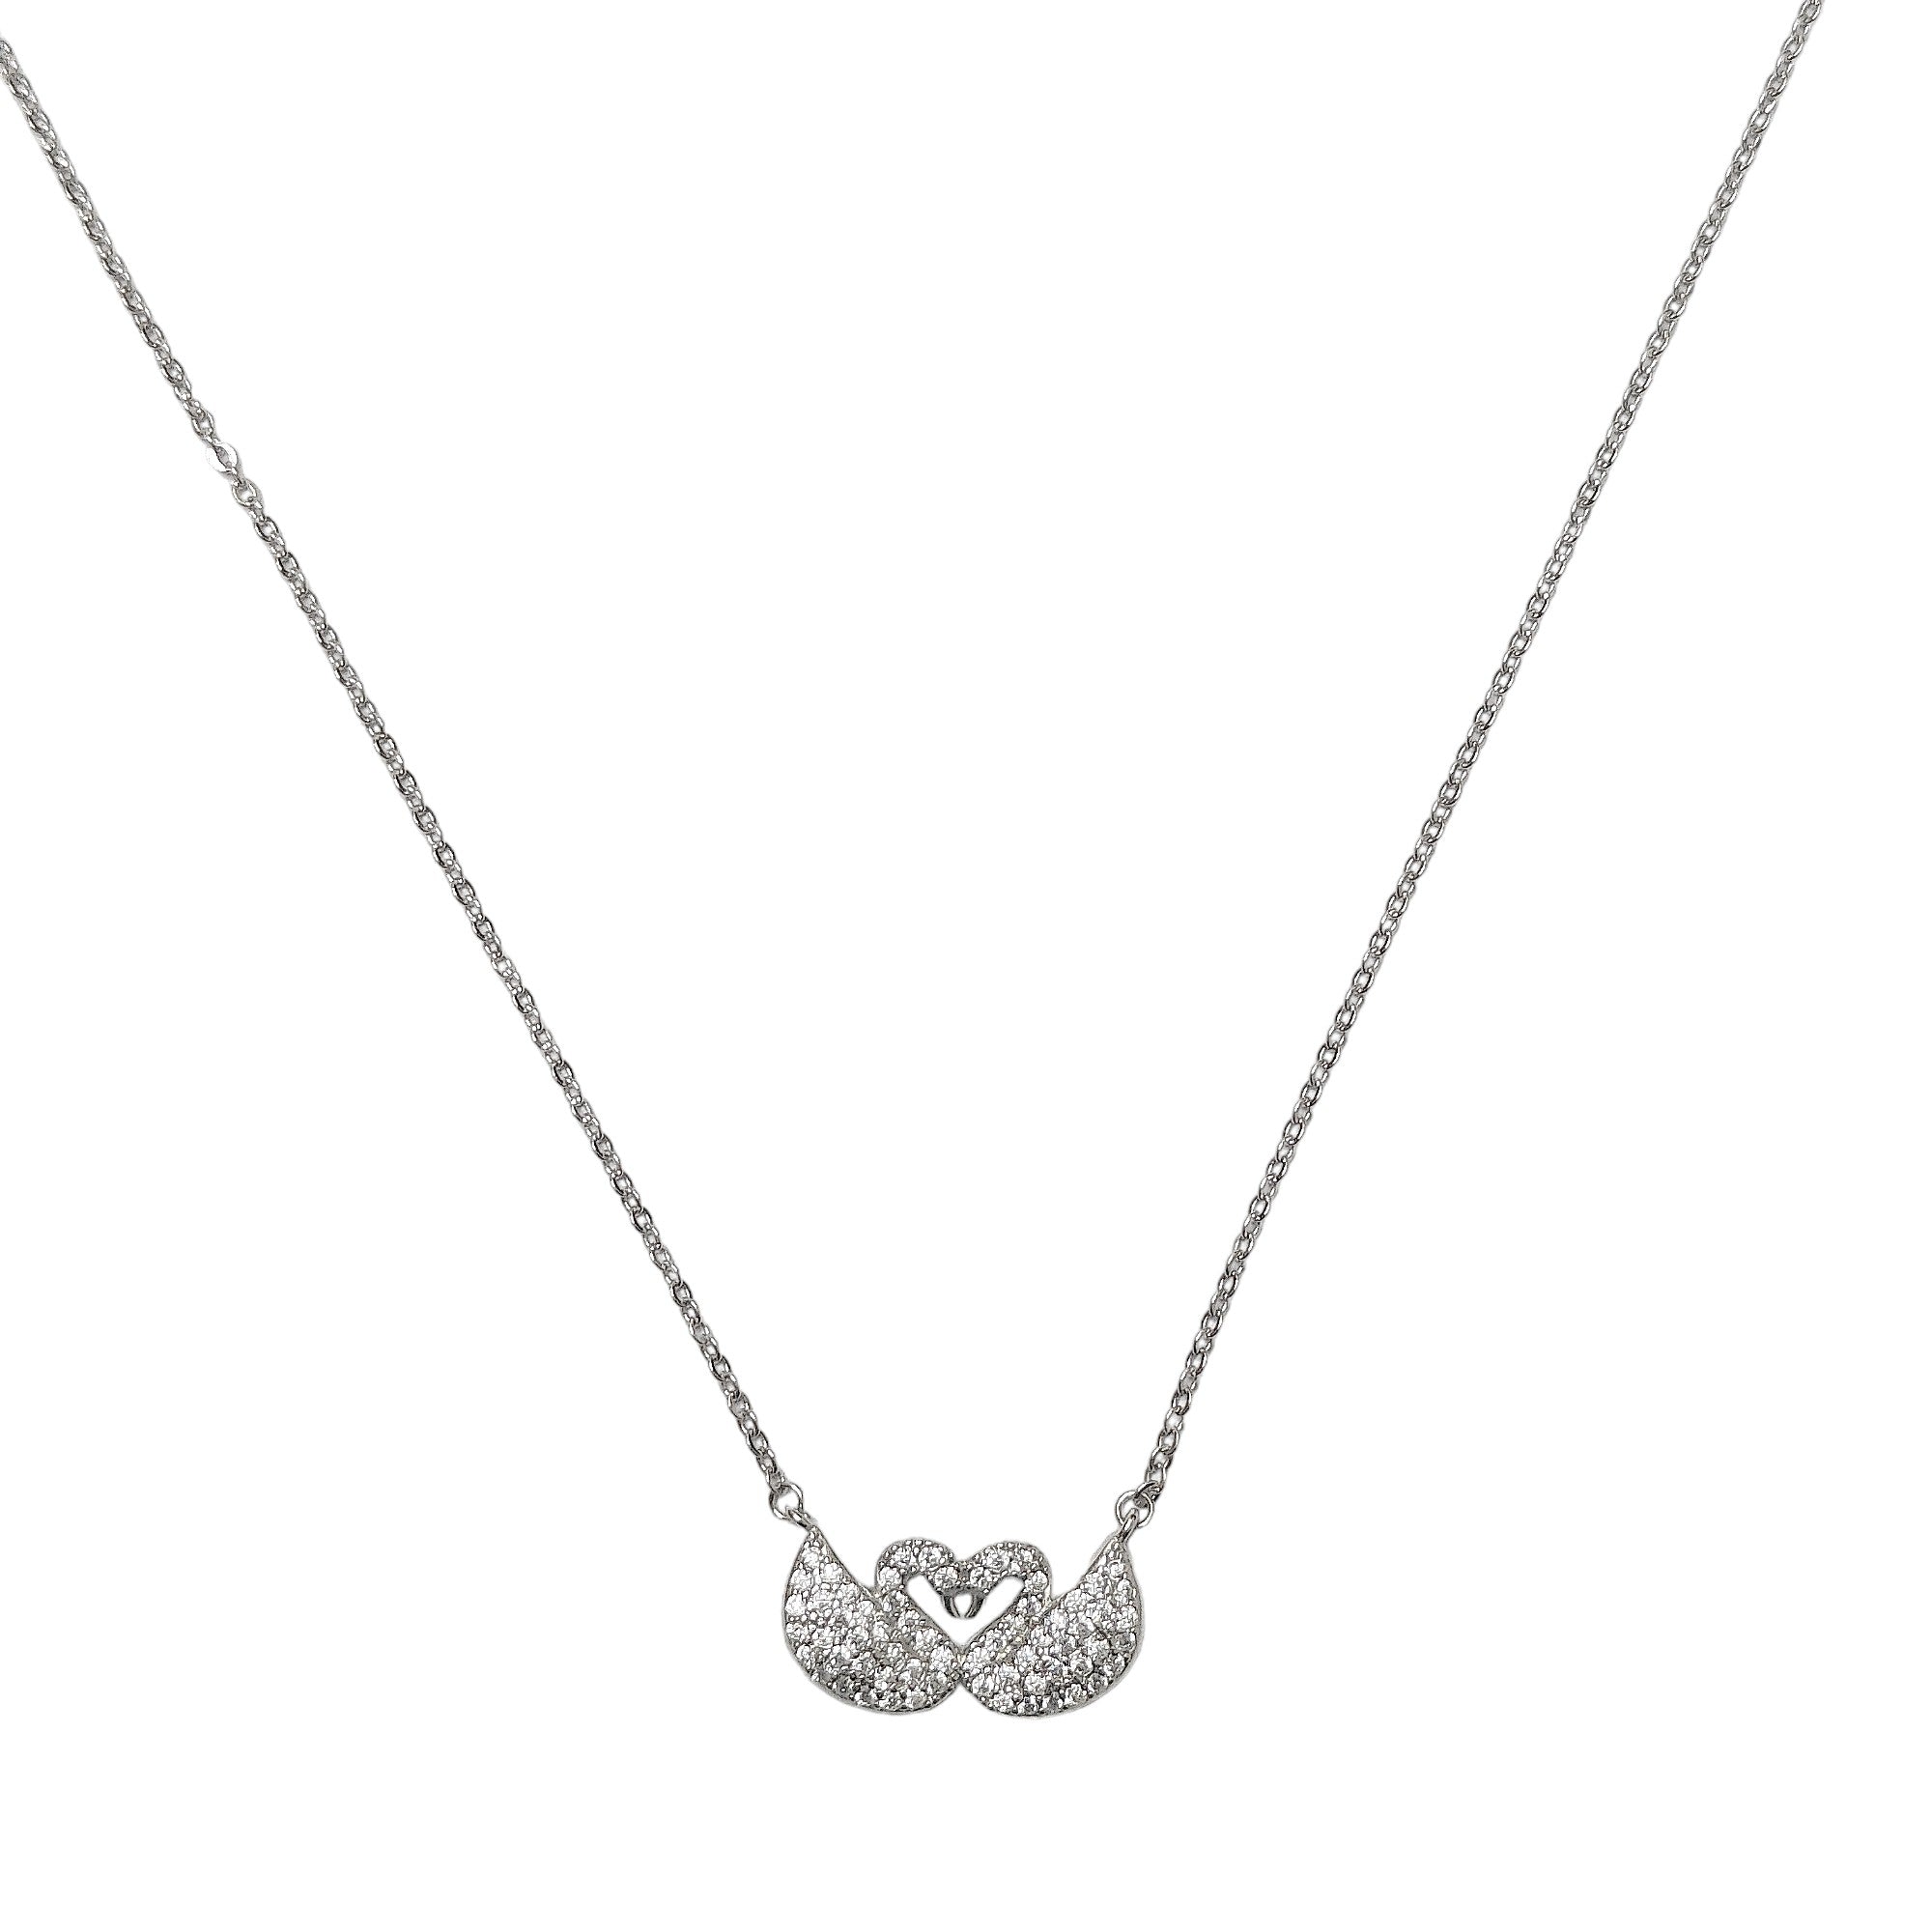 Swan Lake 925 Sterling Silver Pendant with Link Chain (Gifts for Girls, Girlfriend) - Rivansh